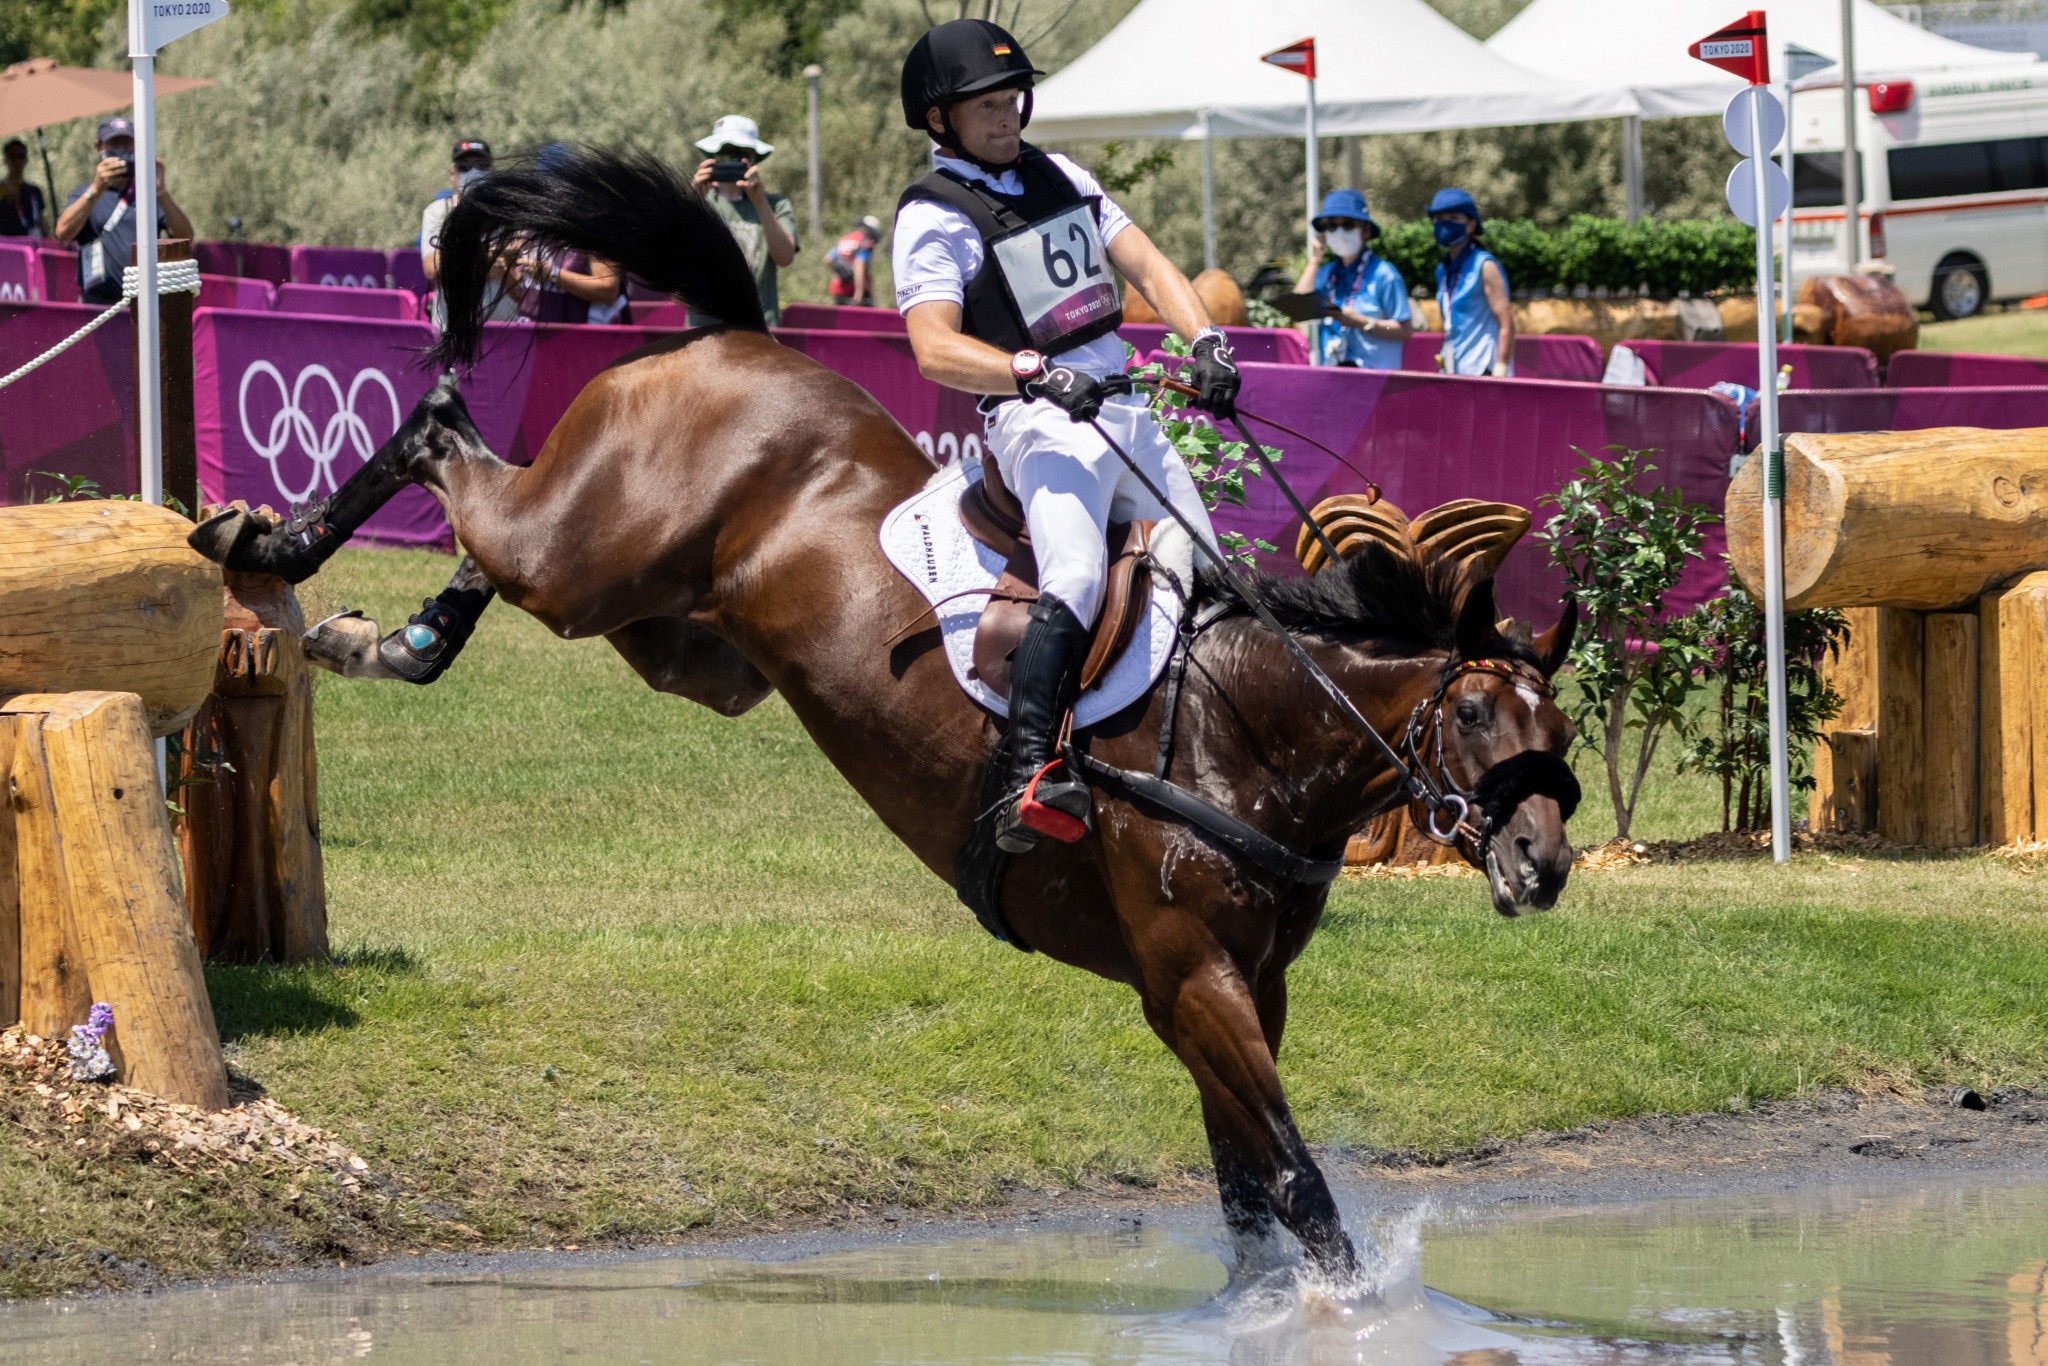 An eventing test event was held prior to the Tokyo 2020 Olympics, but riders will not have the same opportunity for Paris 2024 ©Getty Images